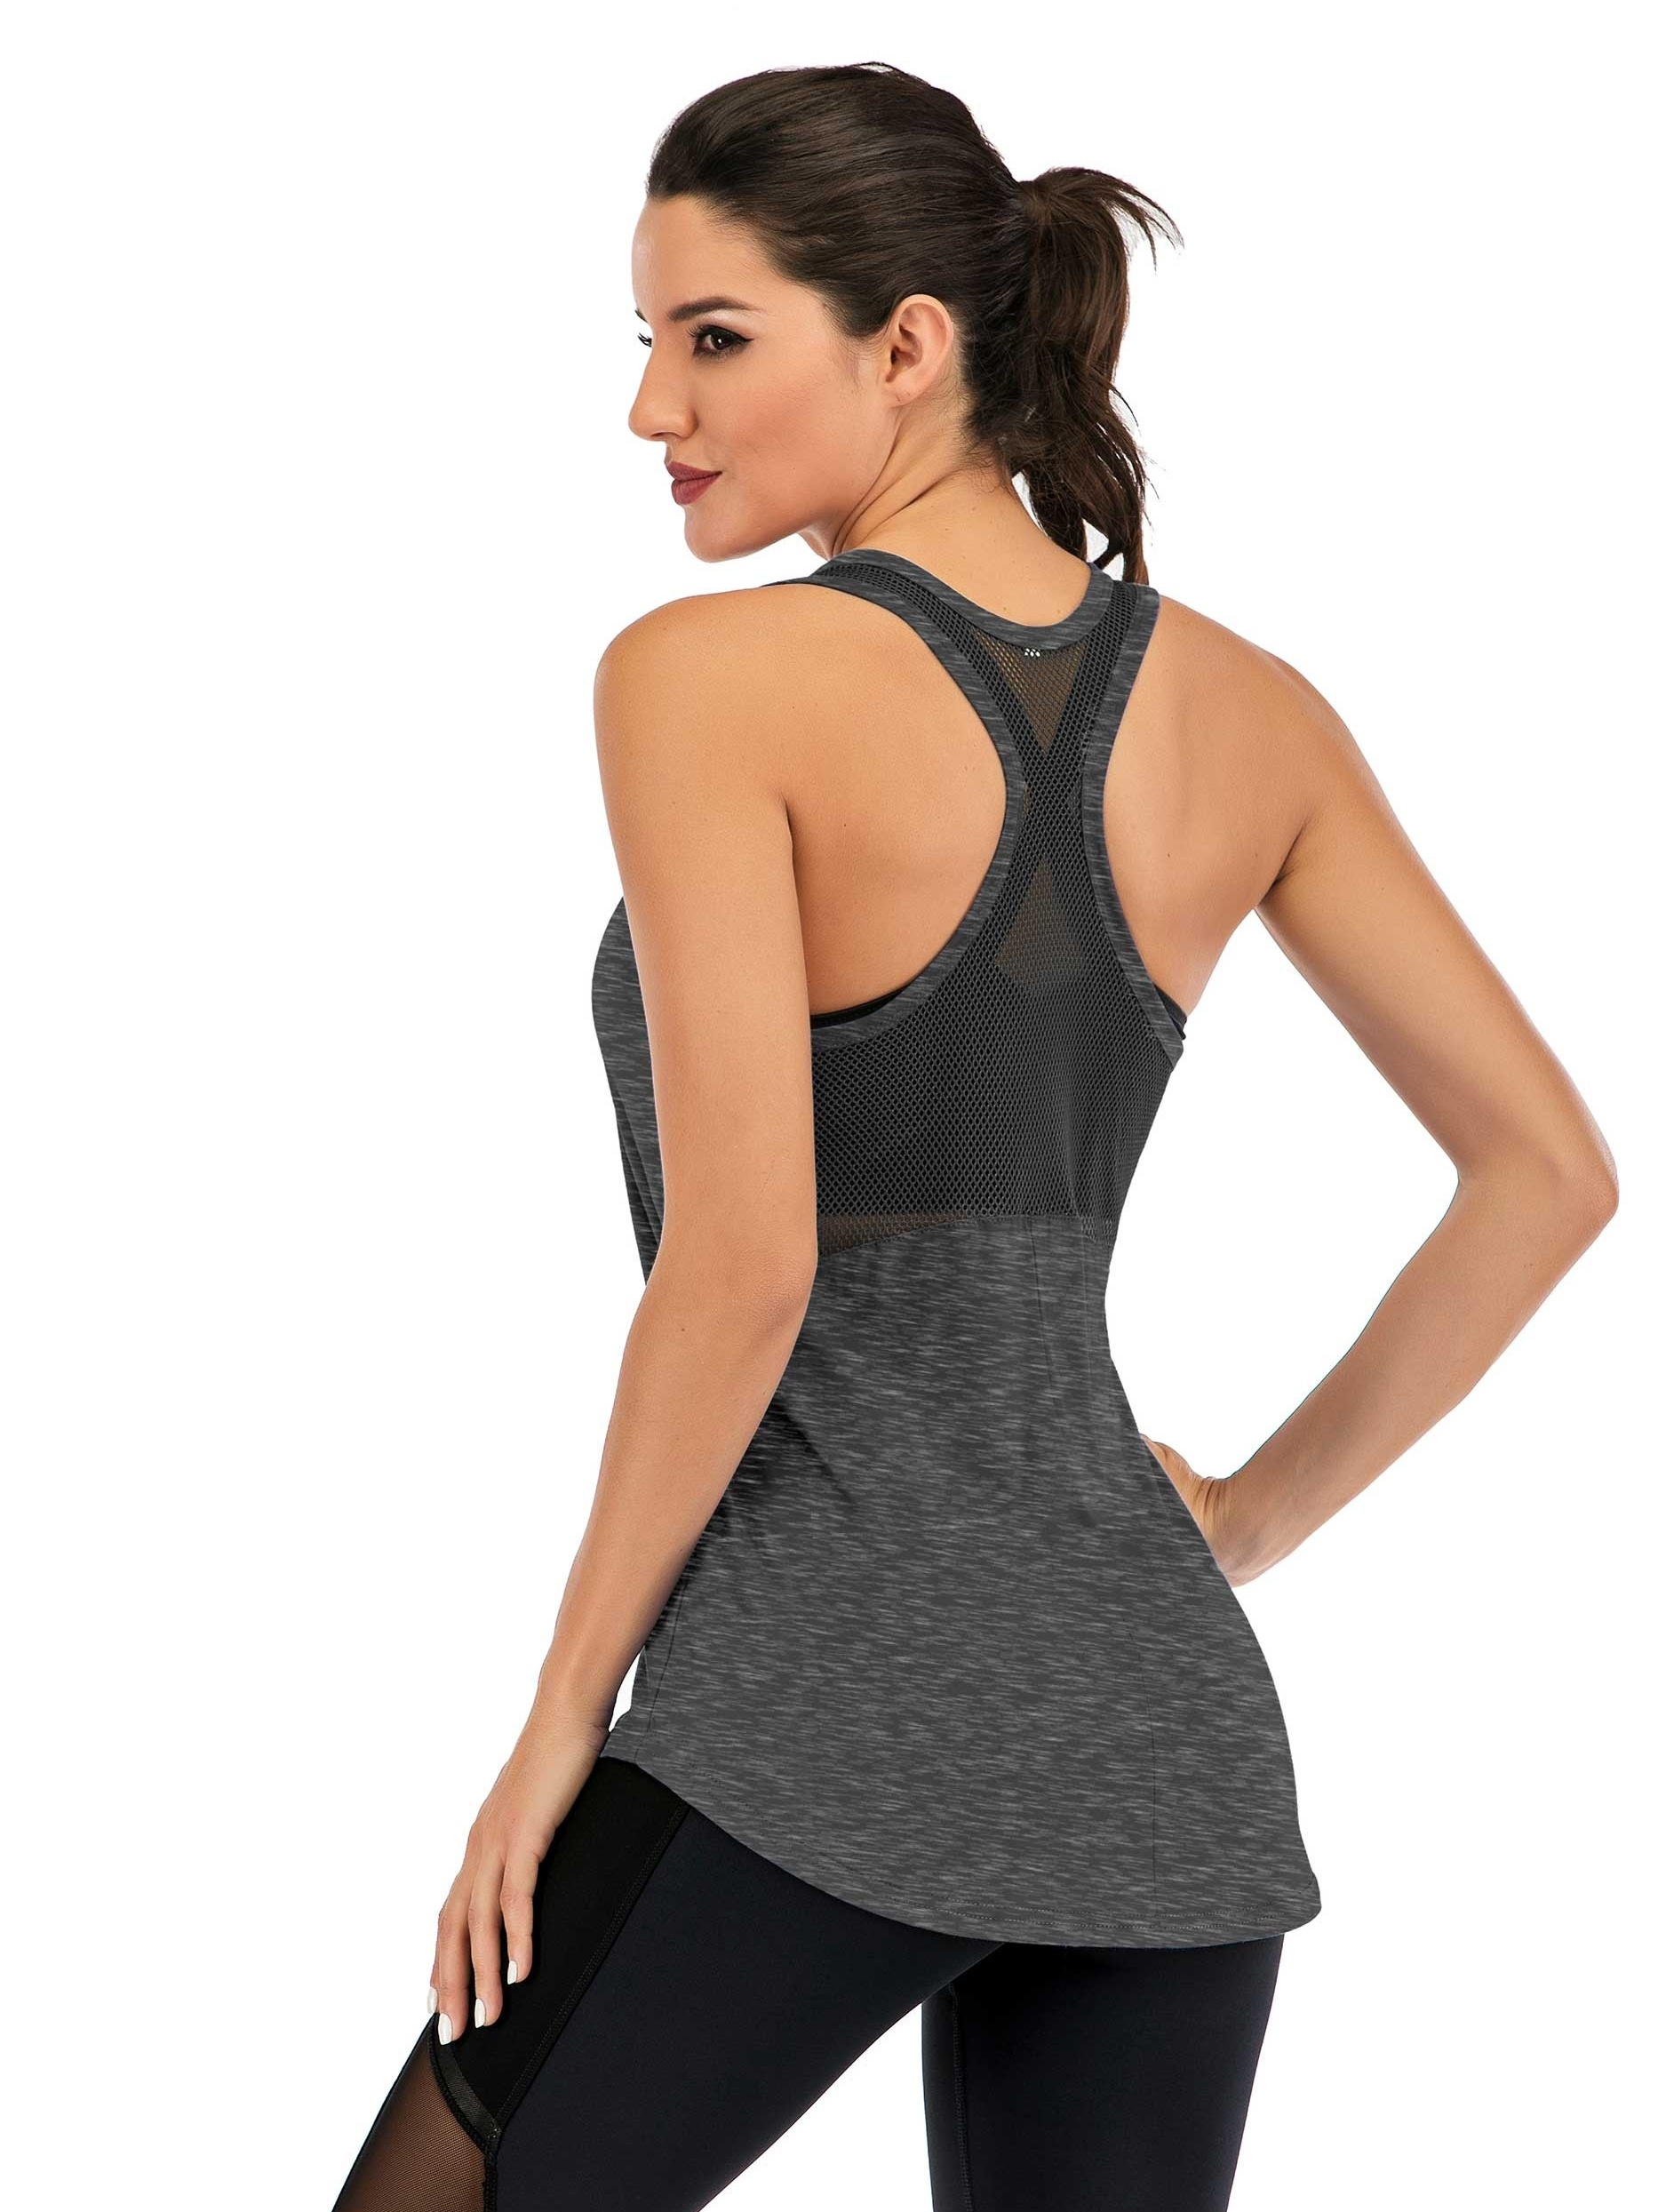 Workout Tanks Sexy Mesh Back Shirts Women Athletic Fitness Sport Tank Tops  Running Training Cloth From 7,3 €